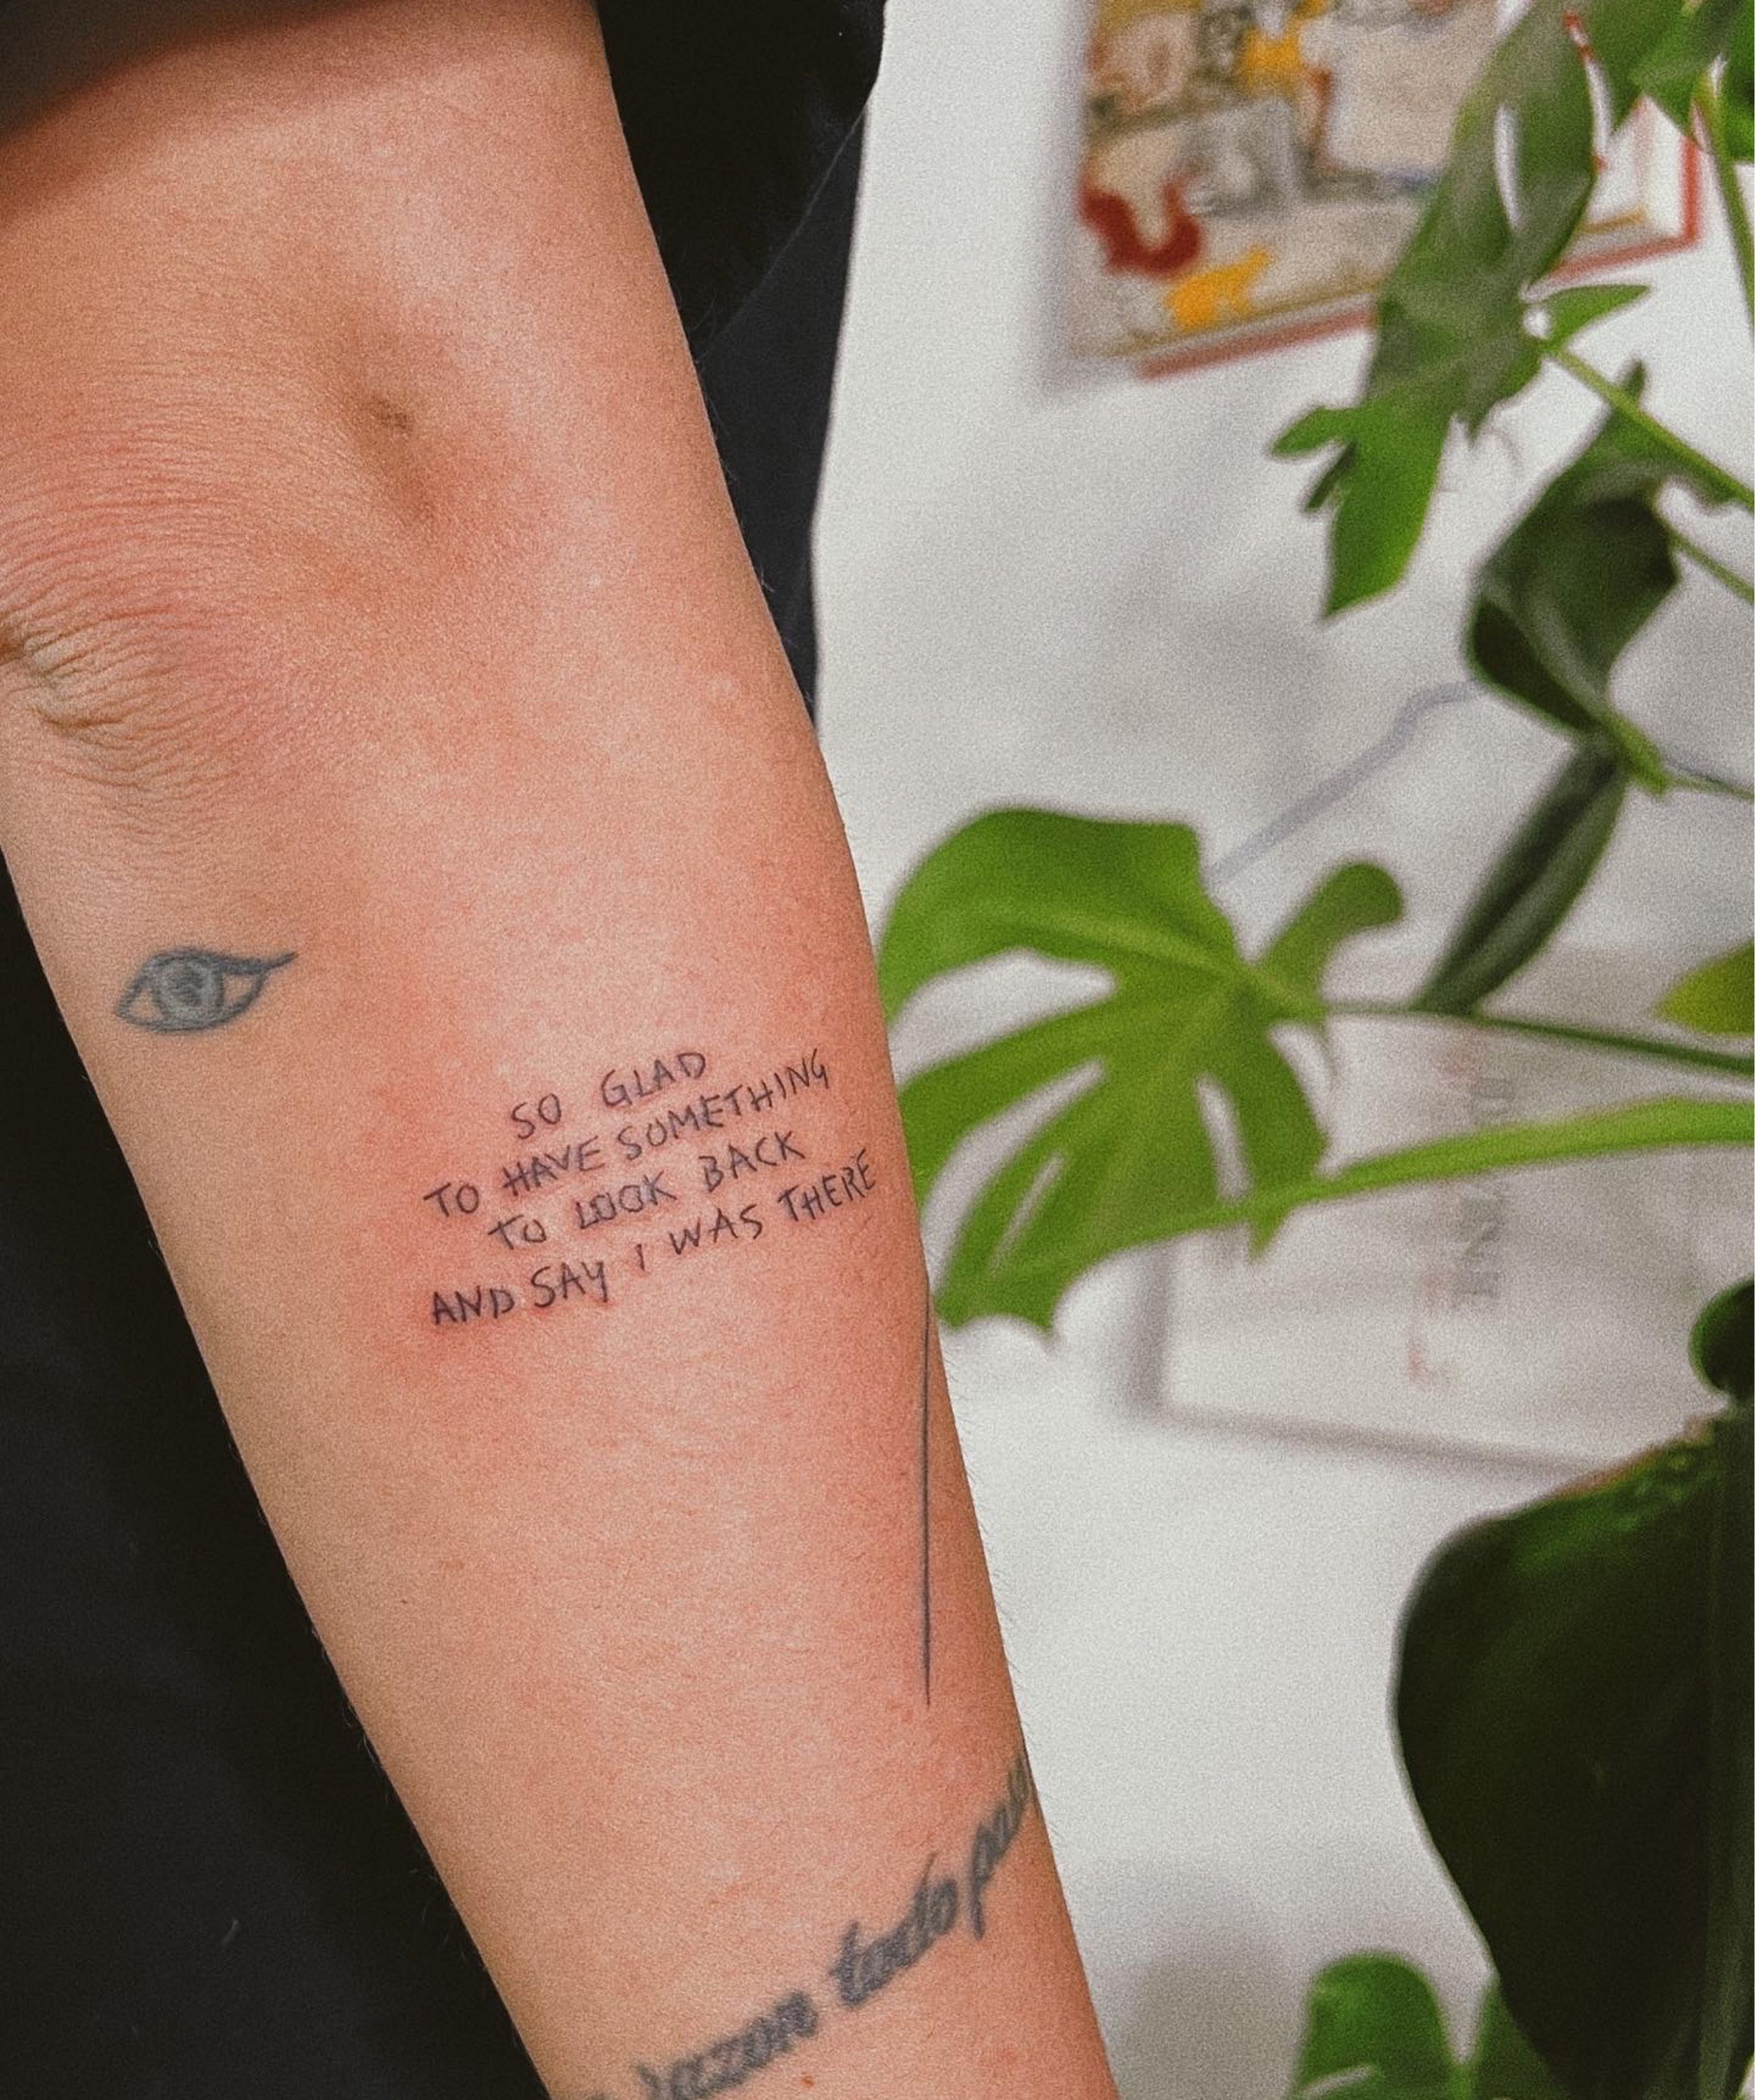 Aggregate 75 tattoo quotes on bicep latest  thtantai2